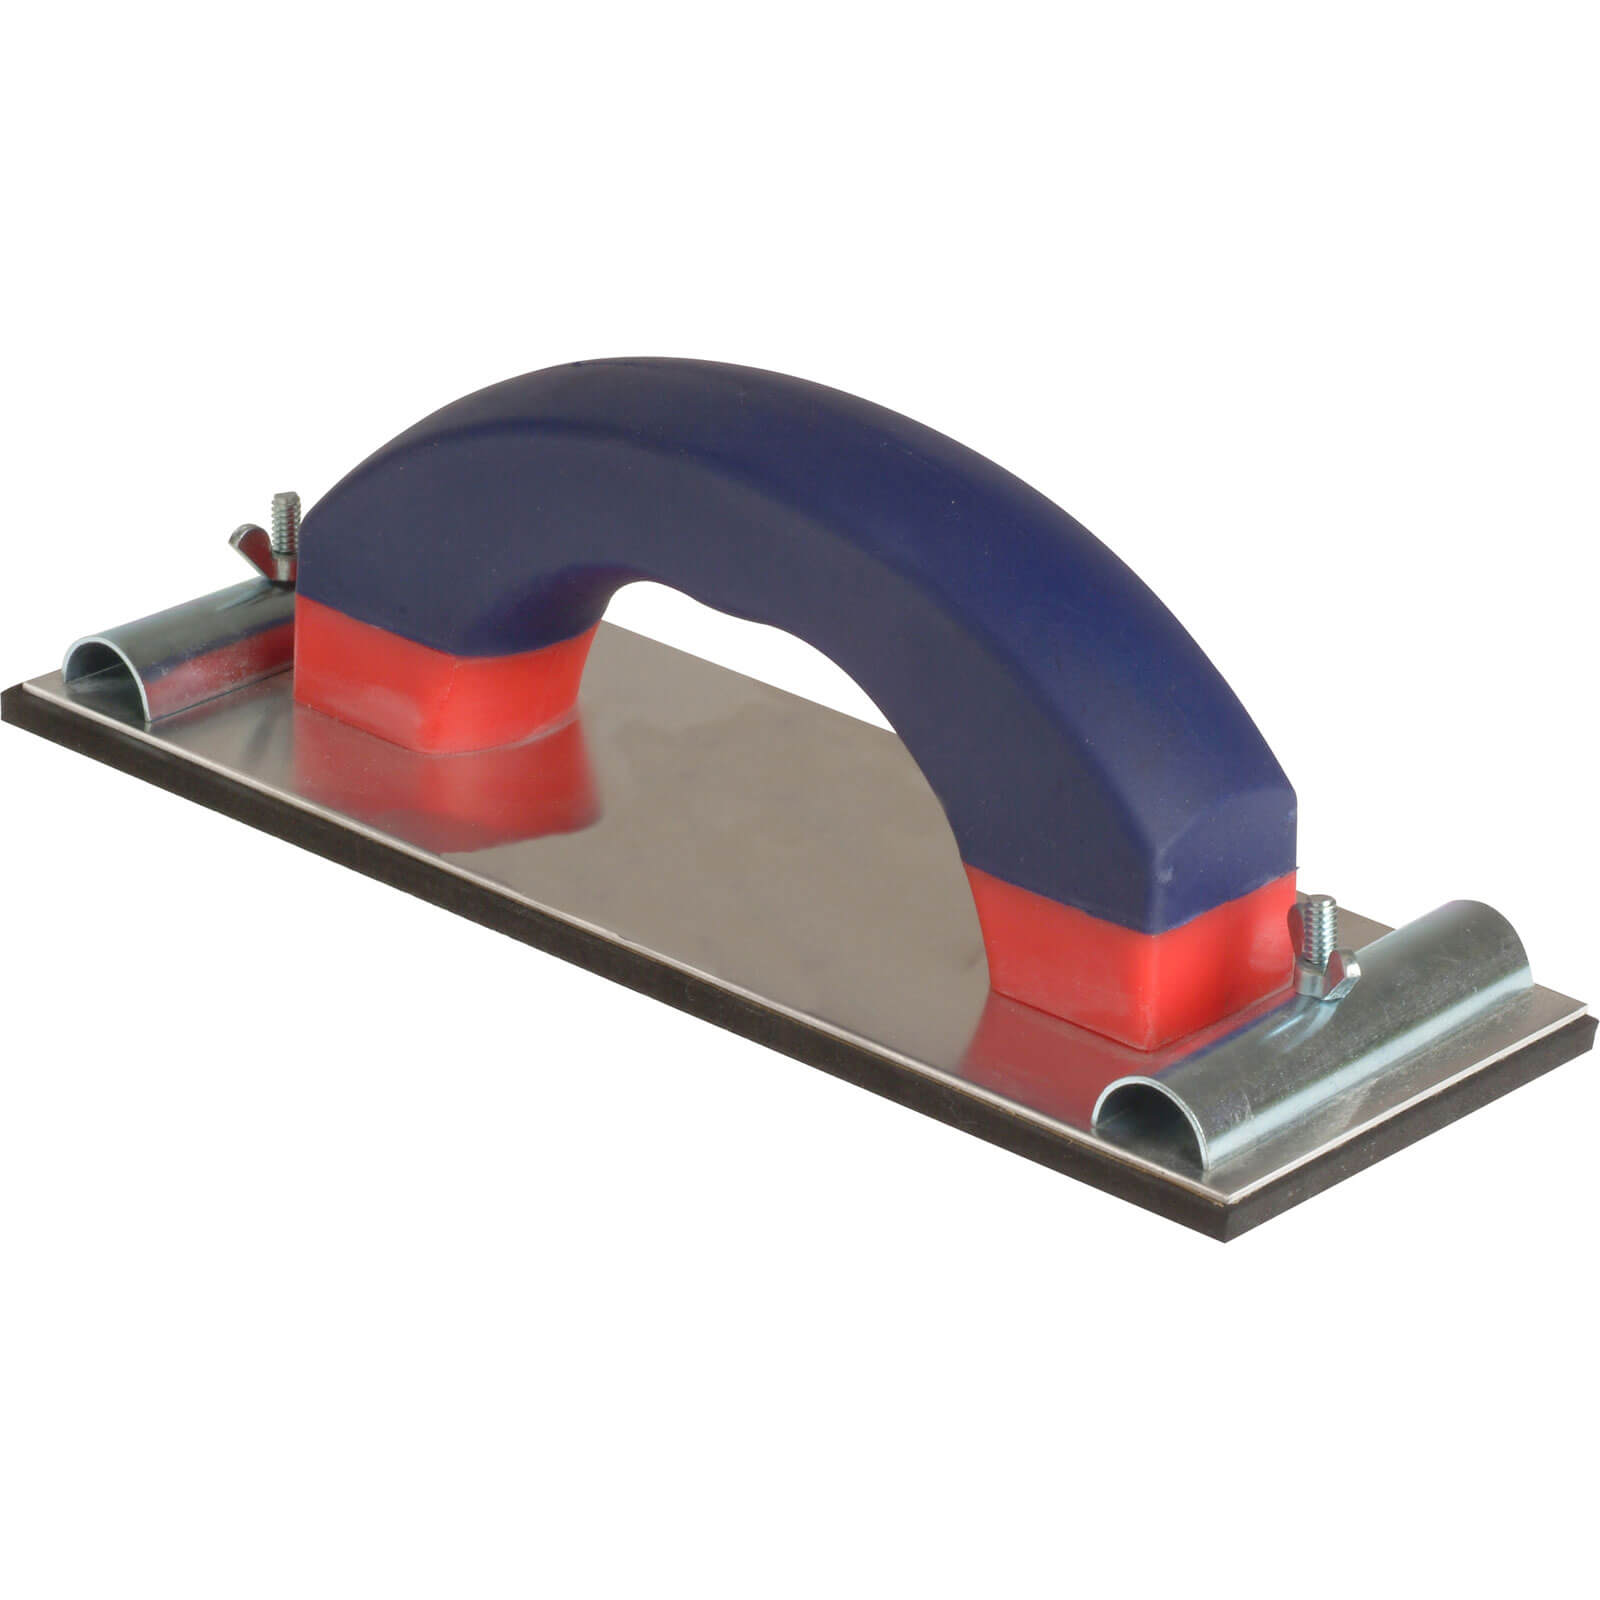 Image of RST Soft Touch Hand Sander 4"